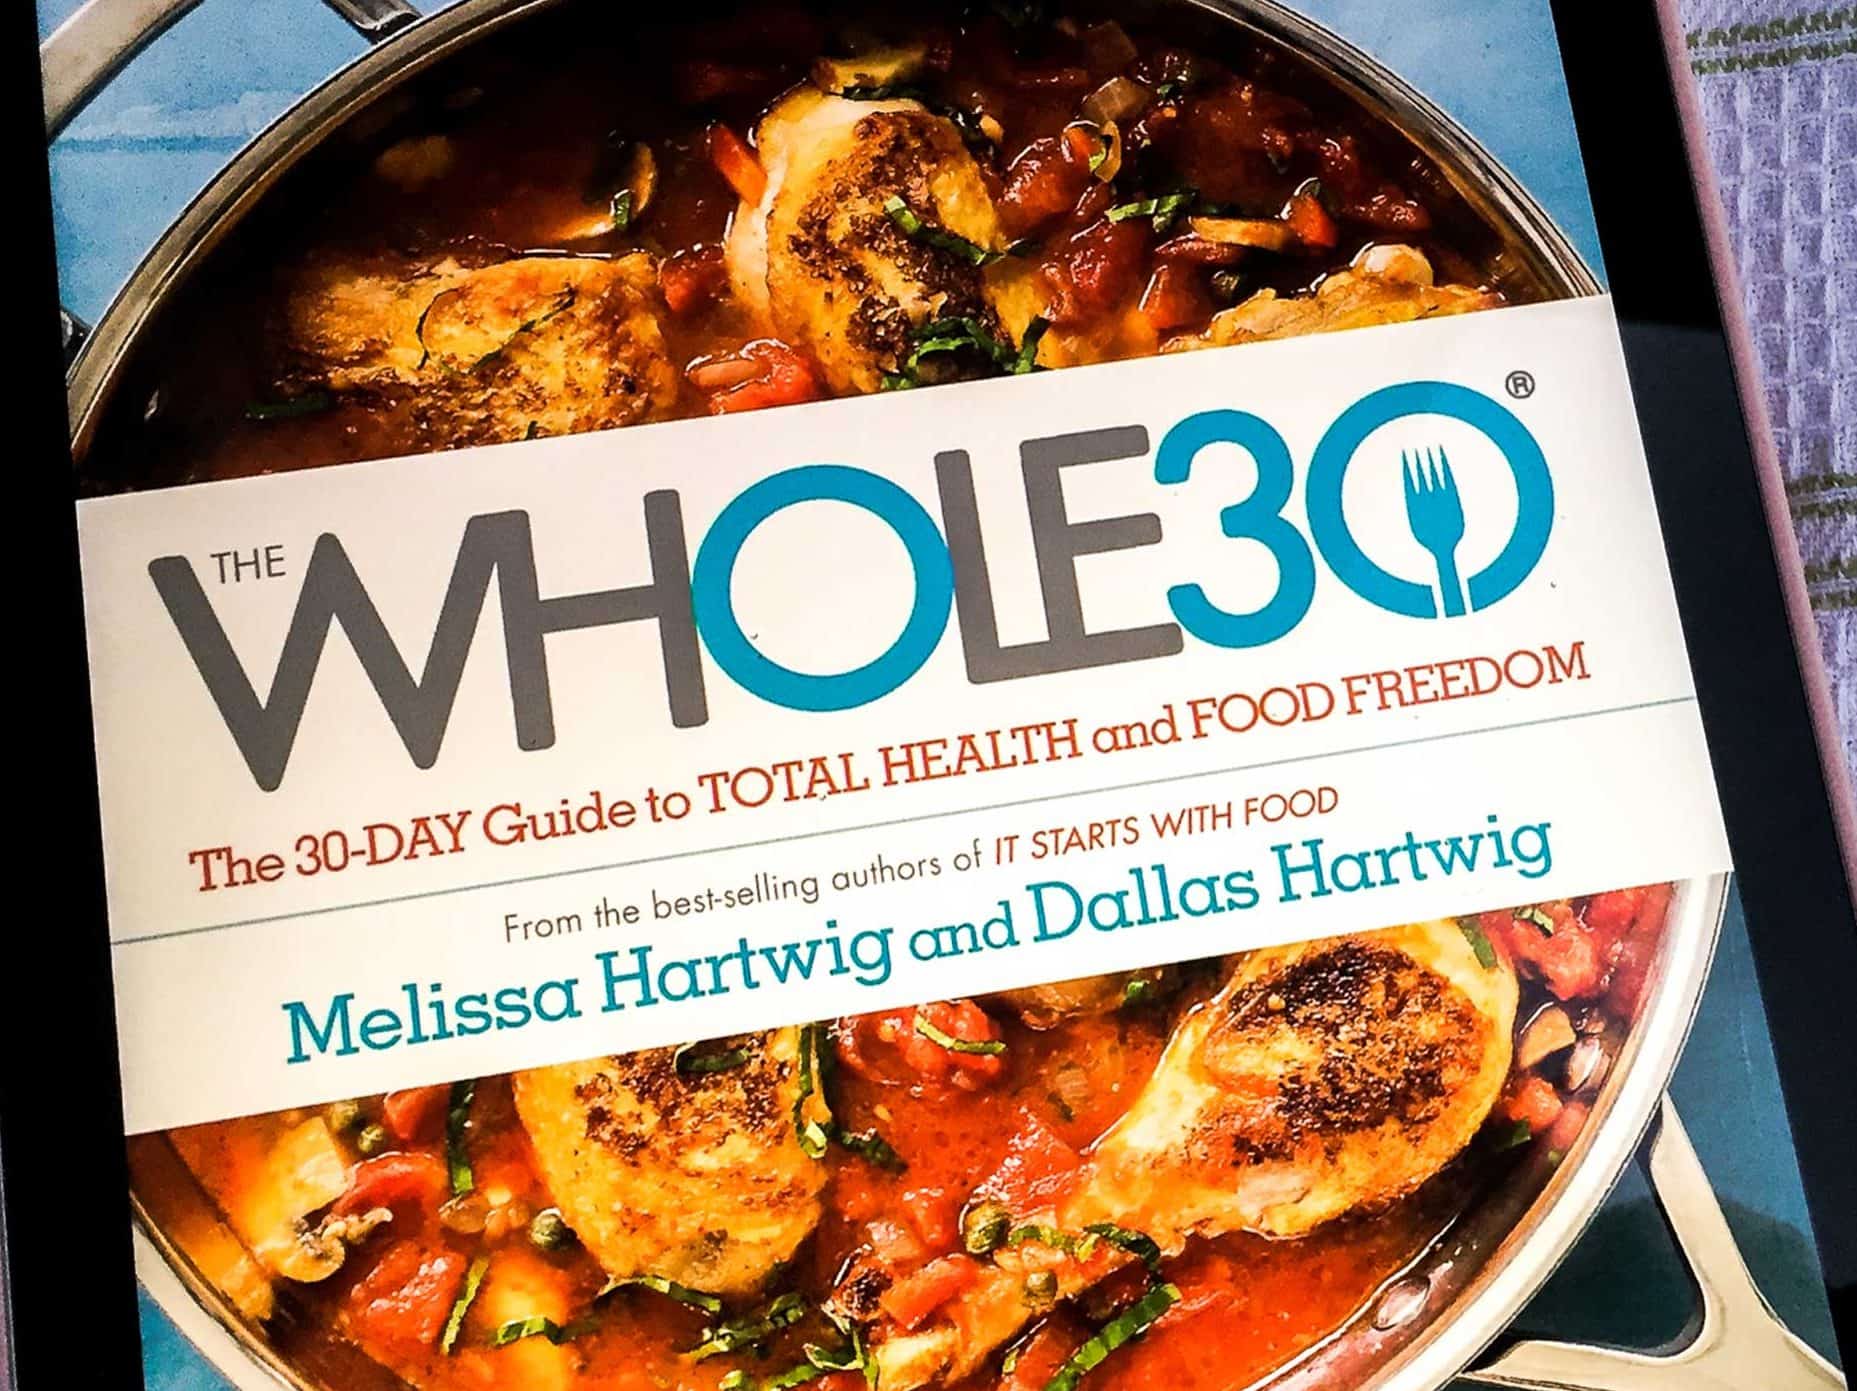 Whole 30 overview